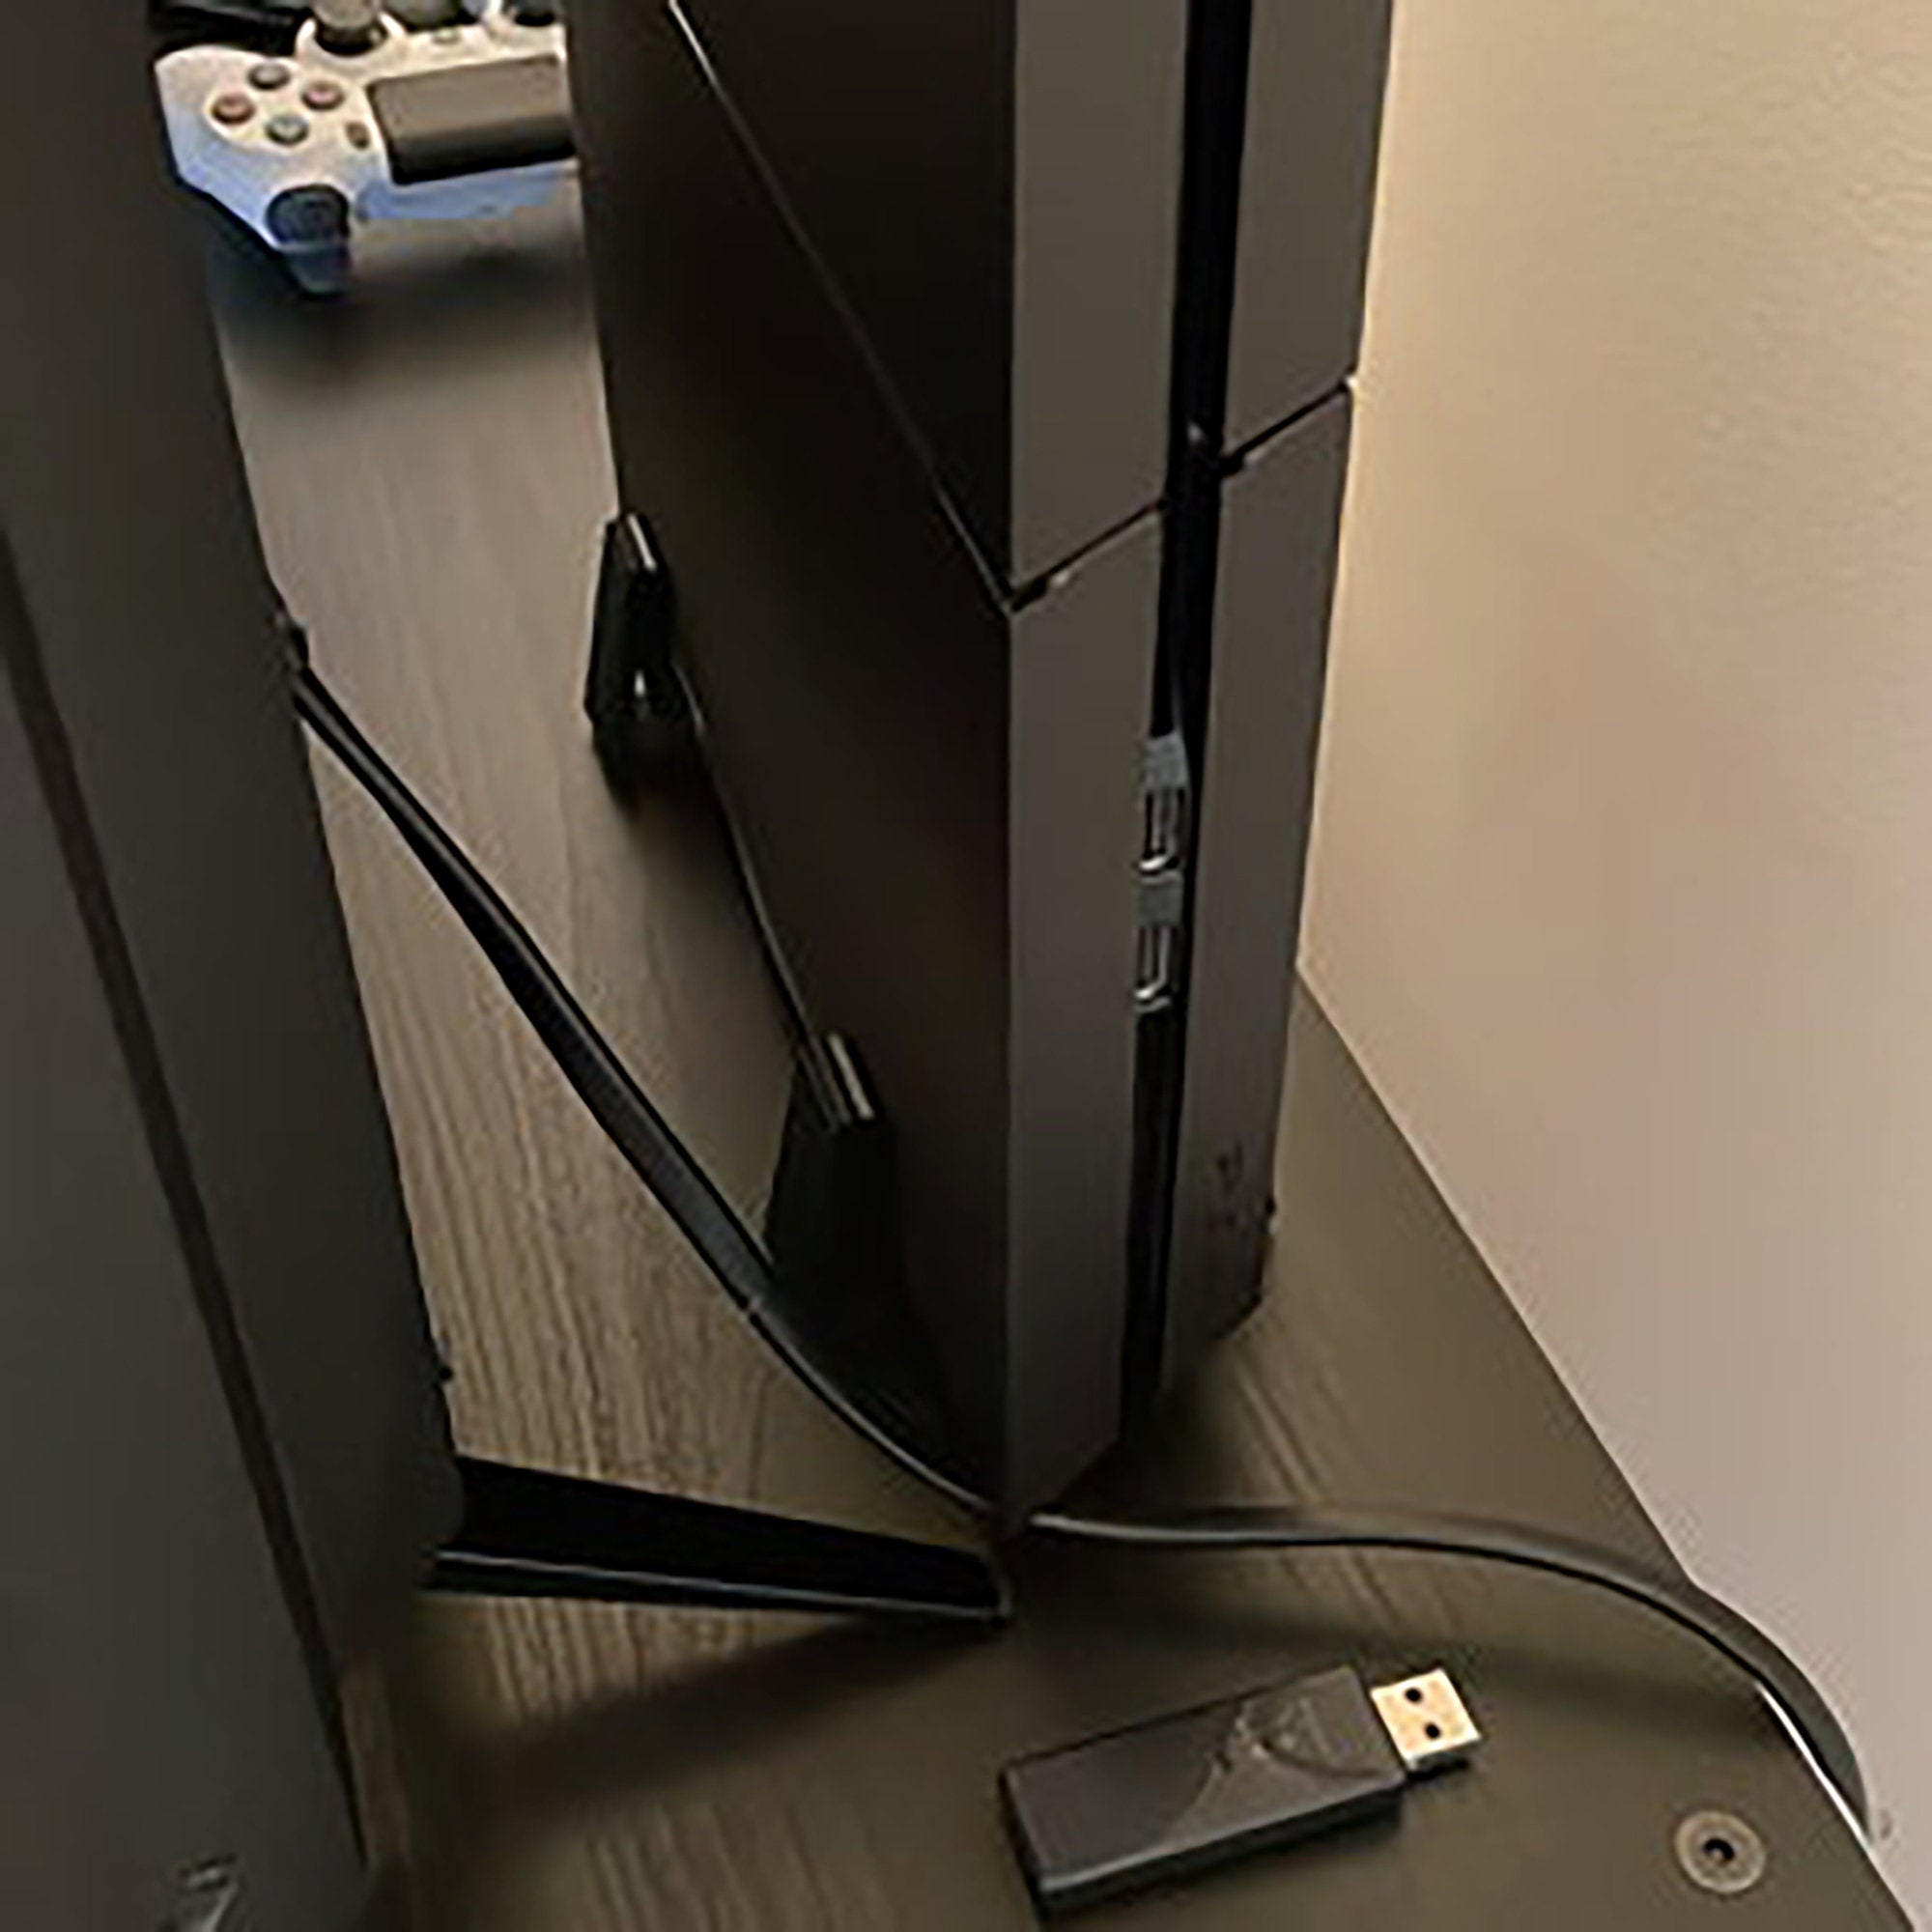 Sony Playstation PS4 Fatty Vertical Stand Original Version Etsy